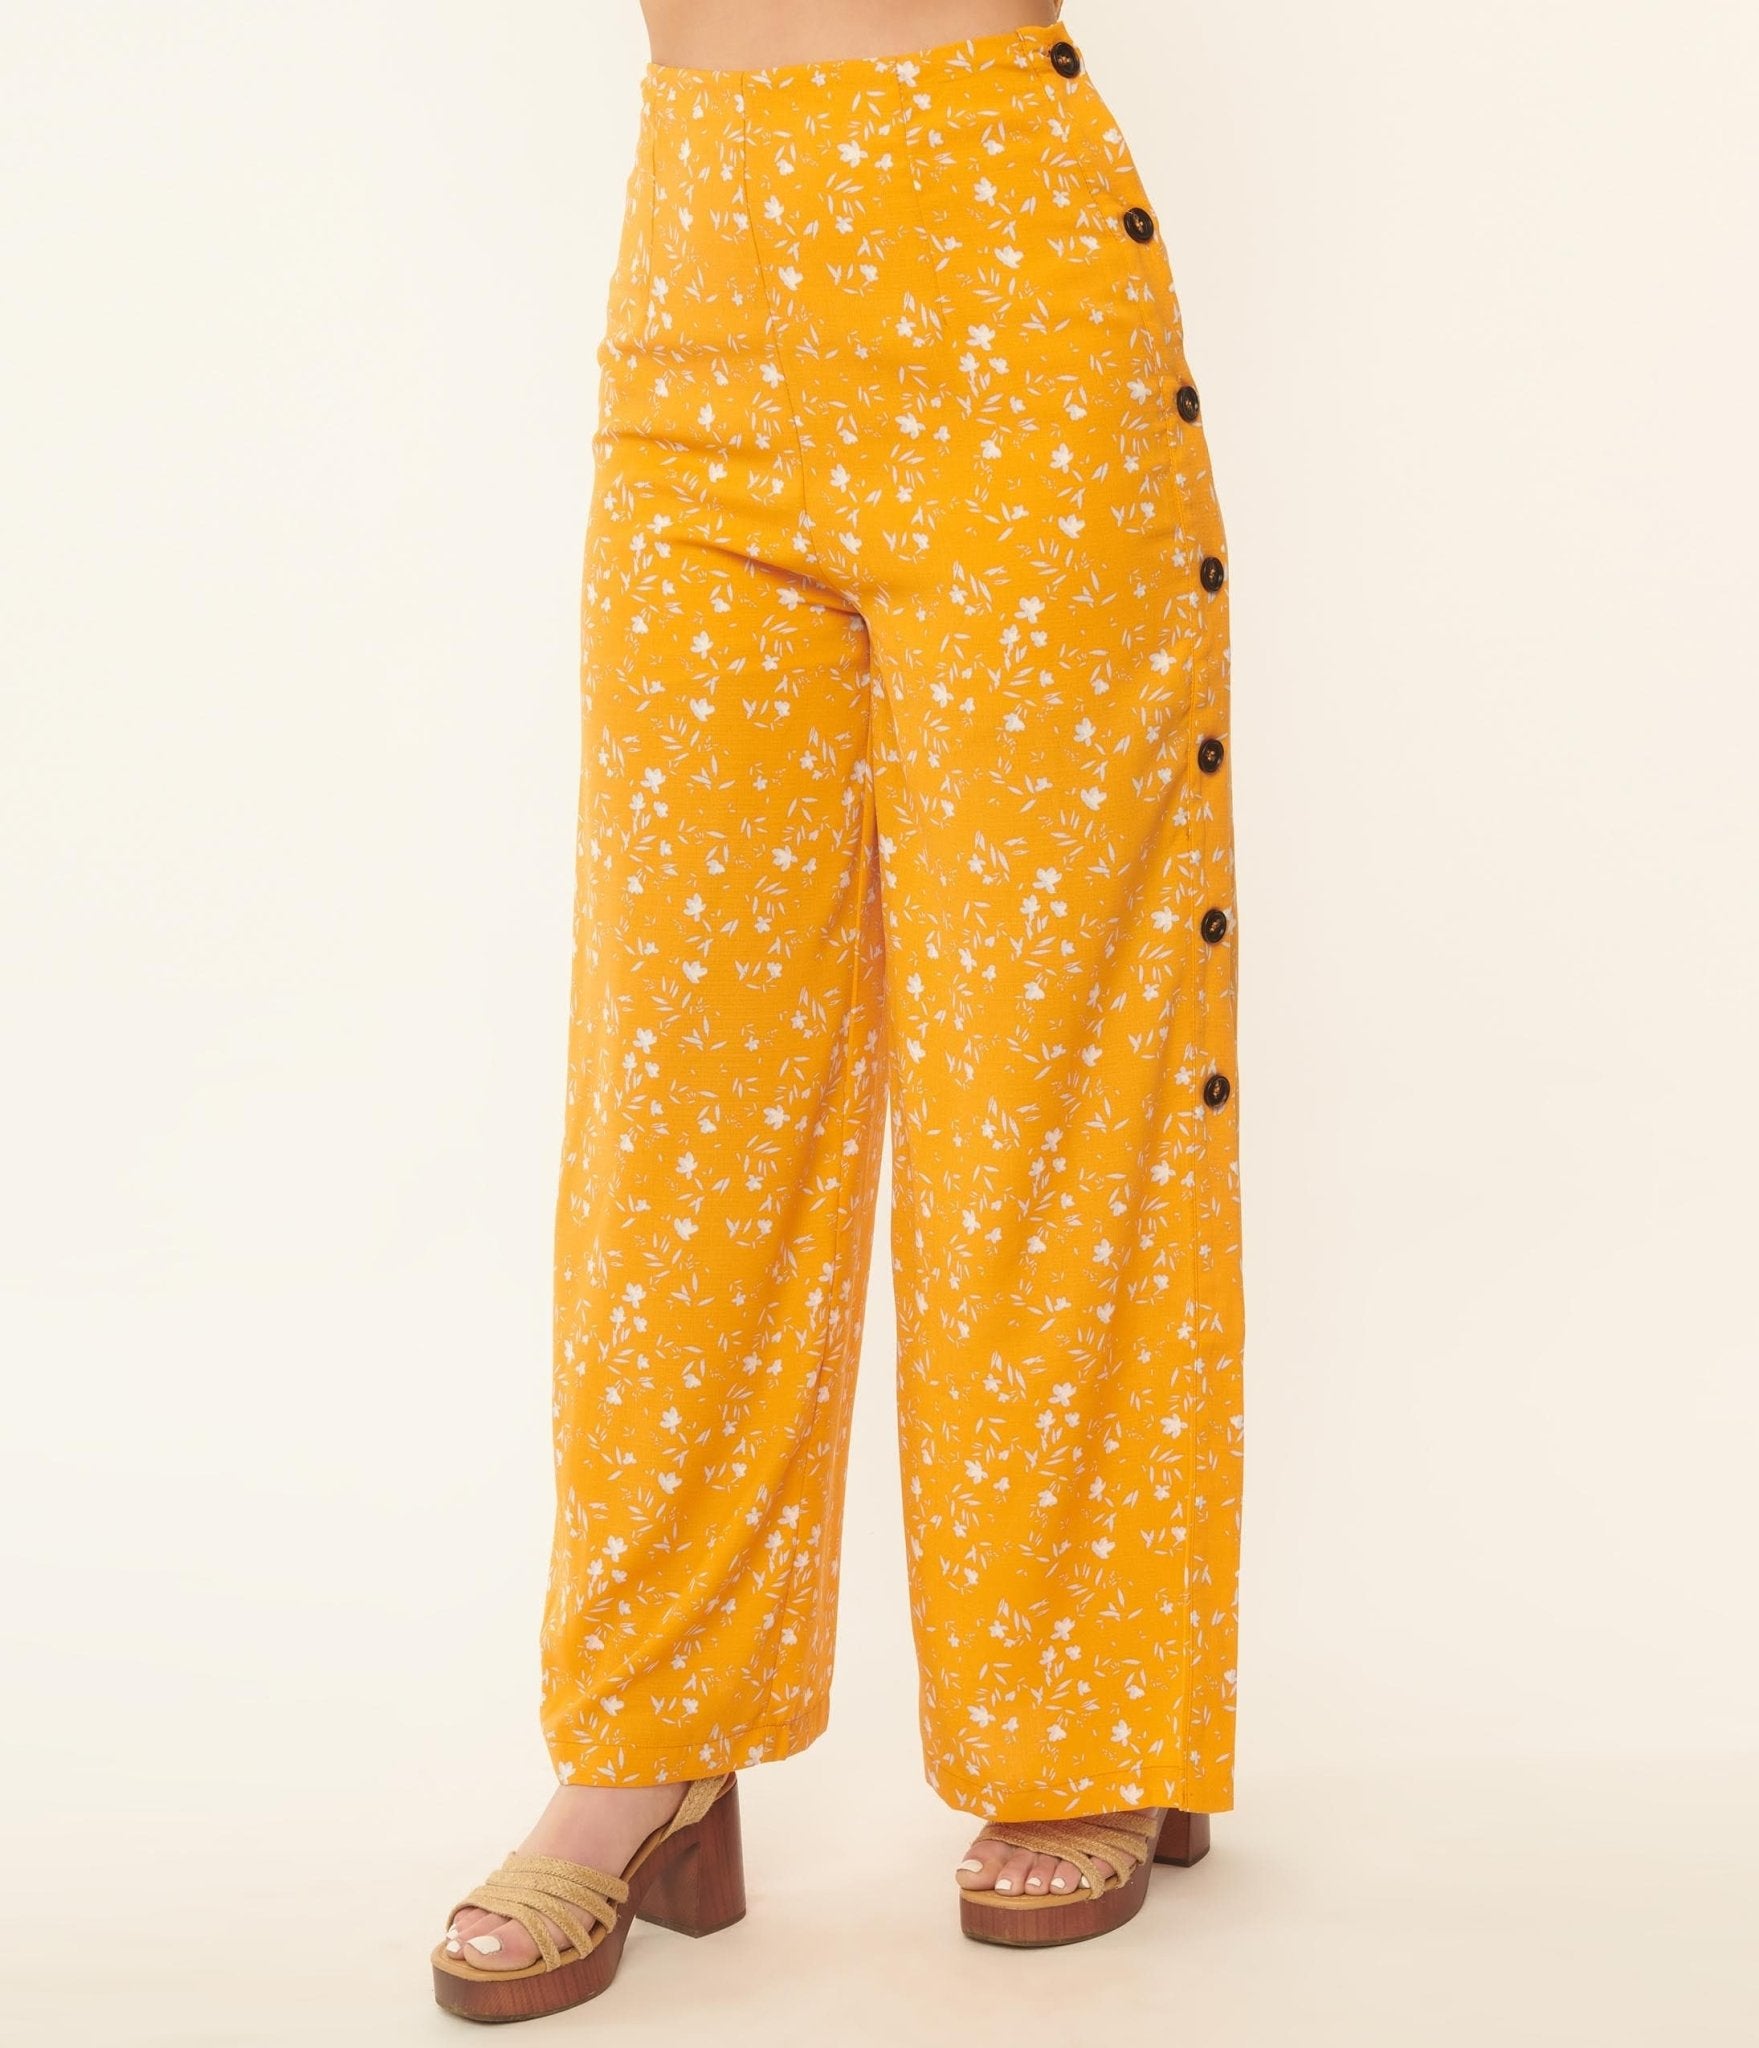 YELLOW RUCHED PANTS – ROCHELLE'S FASHION BOUTIQUE